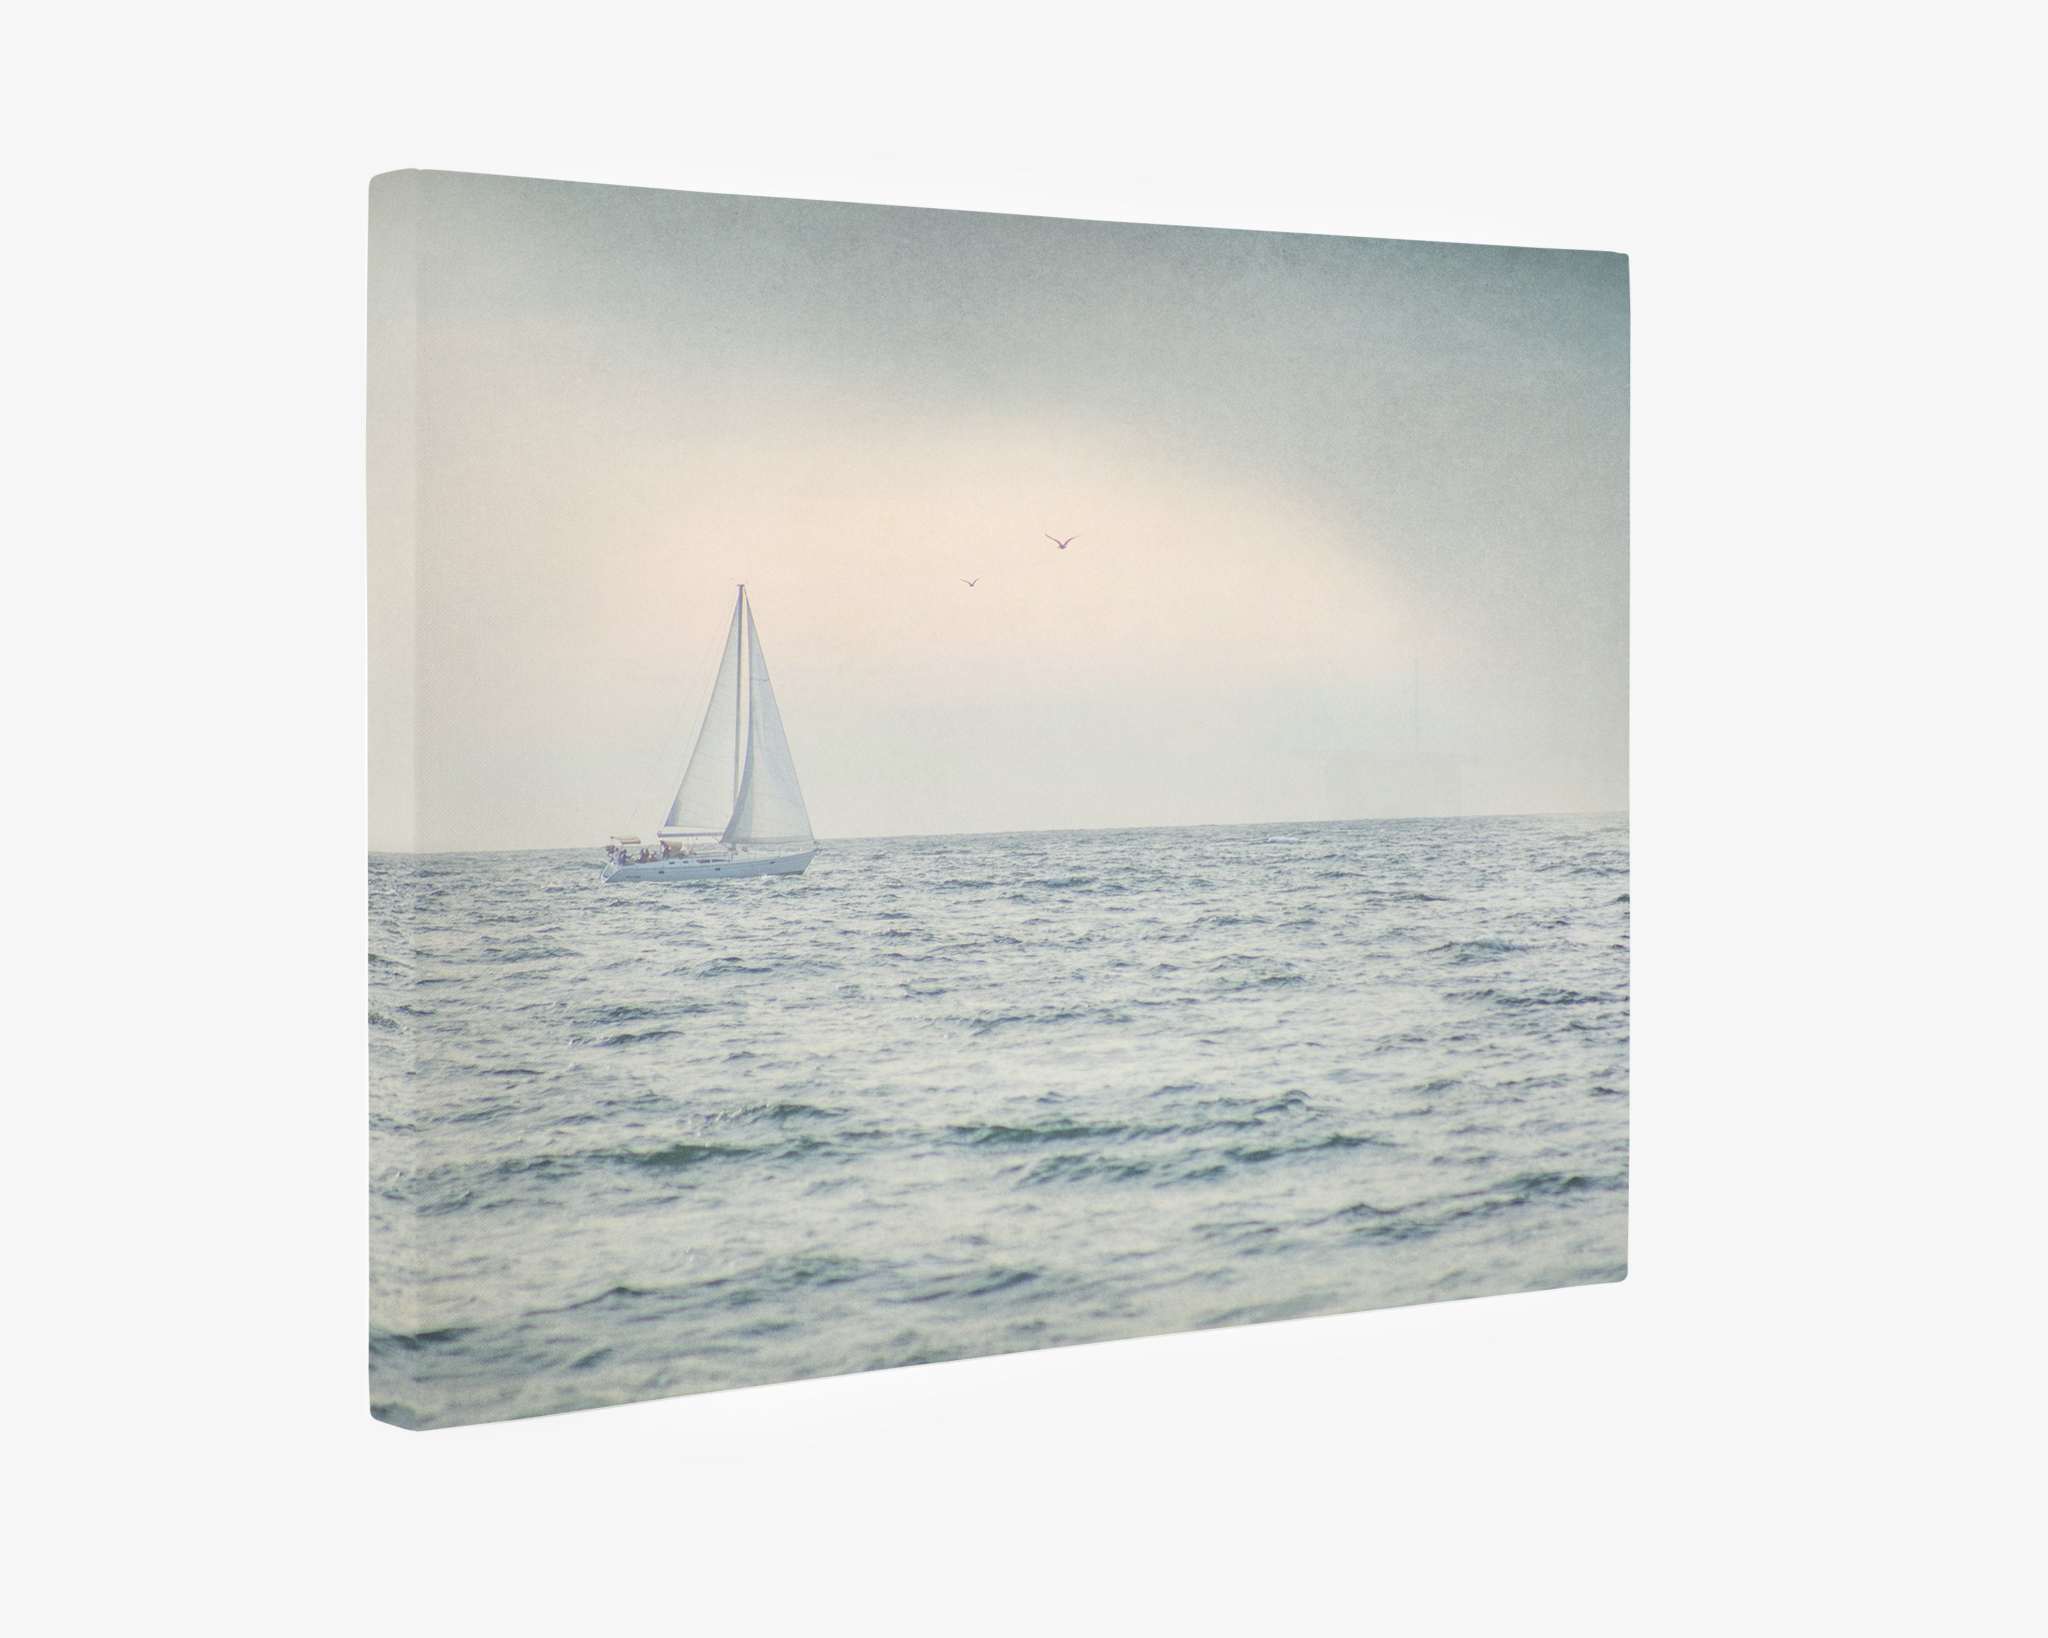 A serene seascape features a lone sailboat with white sails navigating gentle waves under a cloudy sky. Three distant seabirds fly above the horizon, adding to the tranquil scene. The Offley Green Nautical Sail Boat Canvas Art, 'Sailing Into Rain,' presented on premium artist-grade canvas, is softened with a pastel-toned filter, enhancing its calm atmosphere.